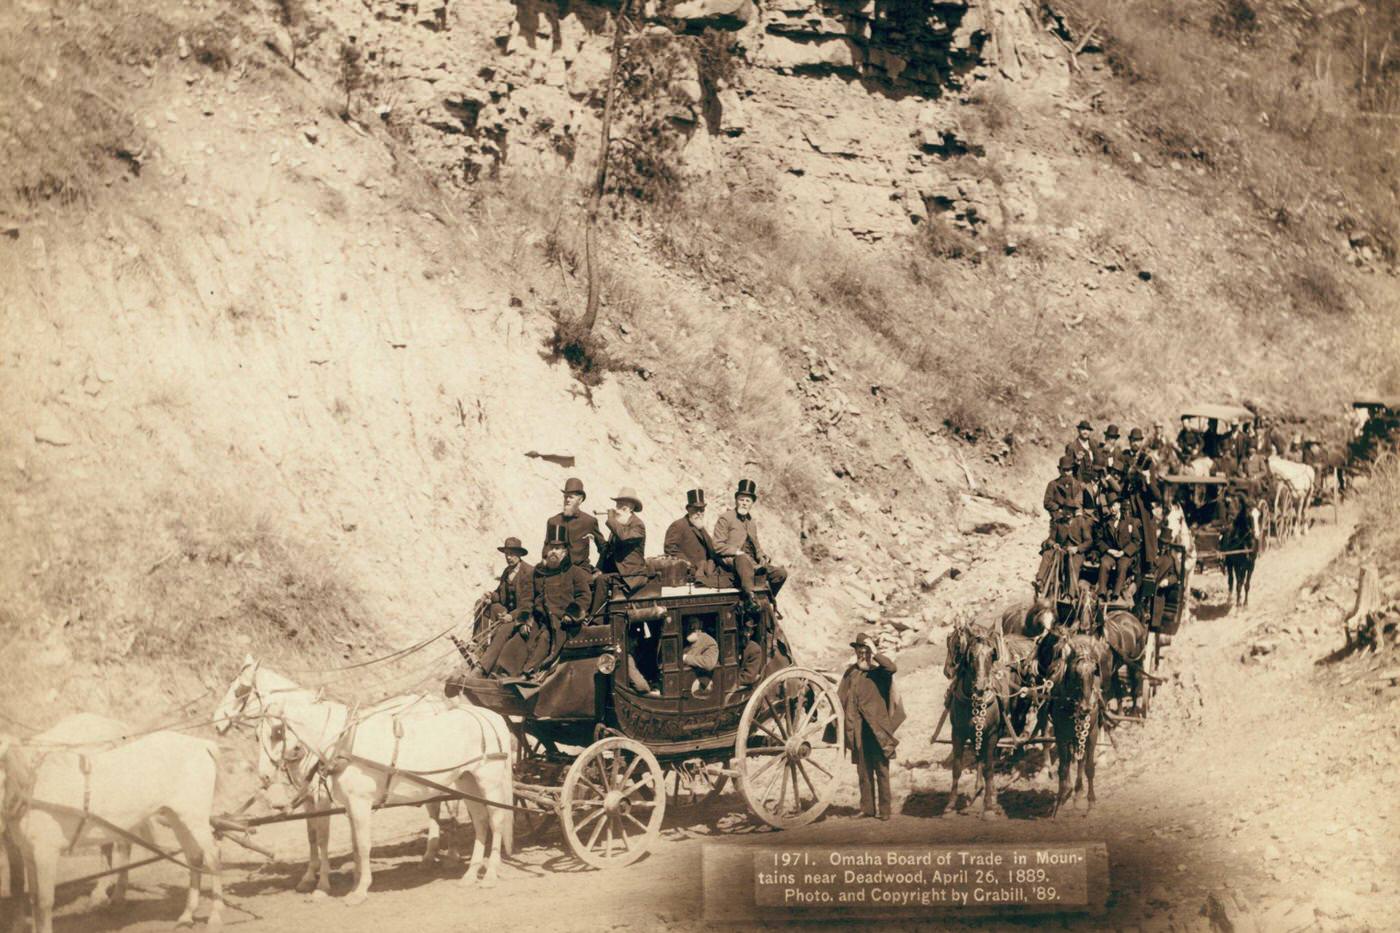 Omaha Board of Trade in Mountains near Deadwood, United States, April 26, 1889